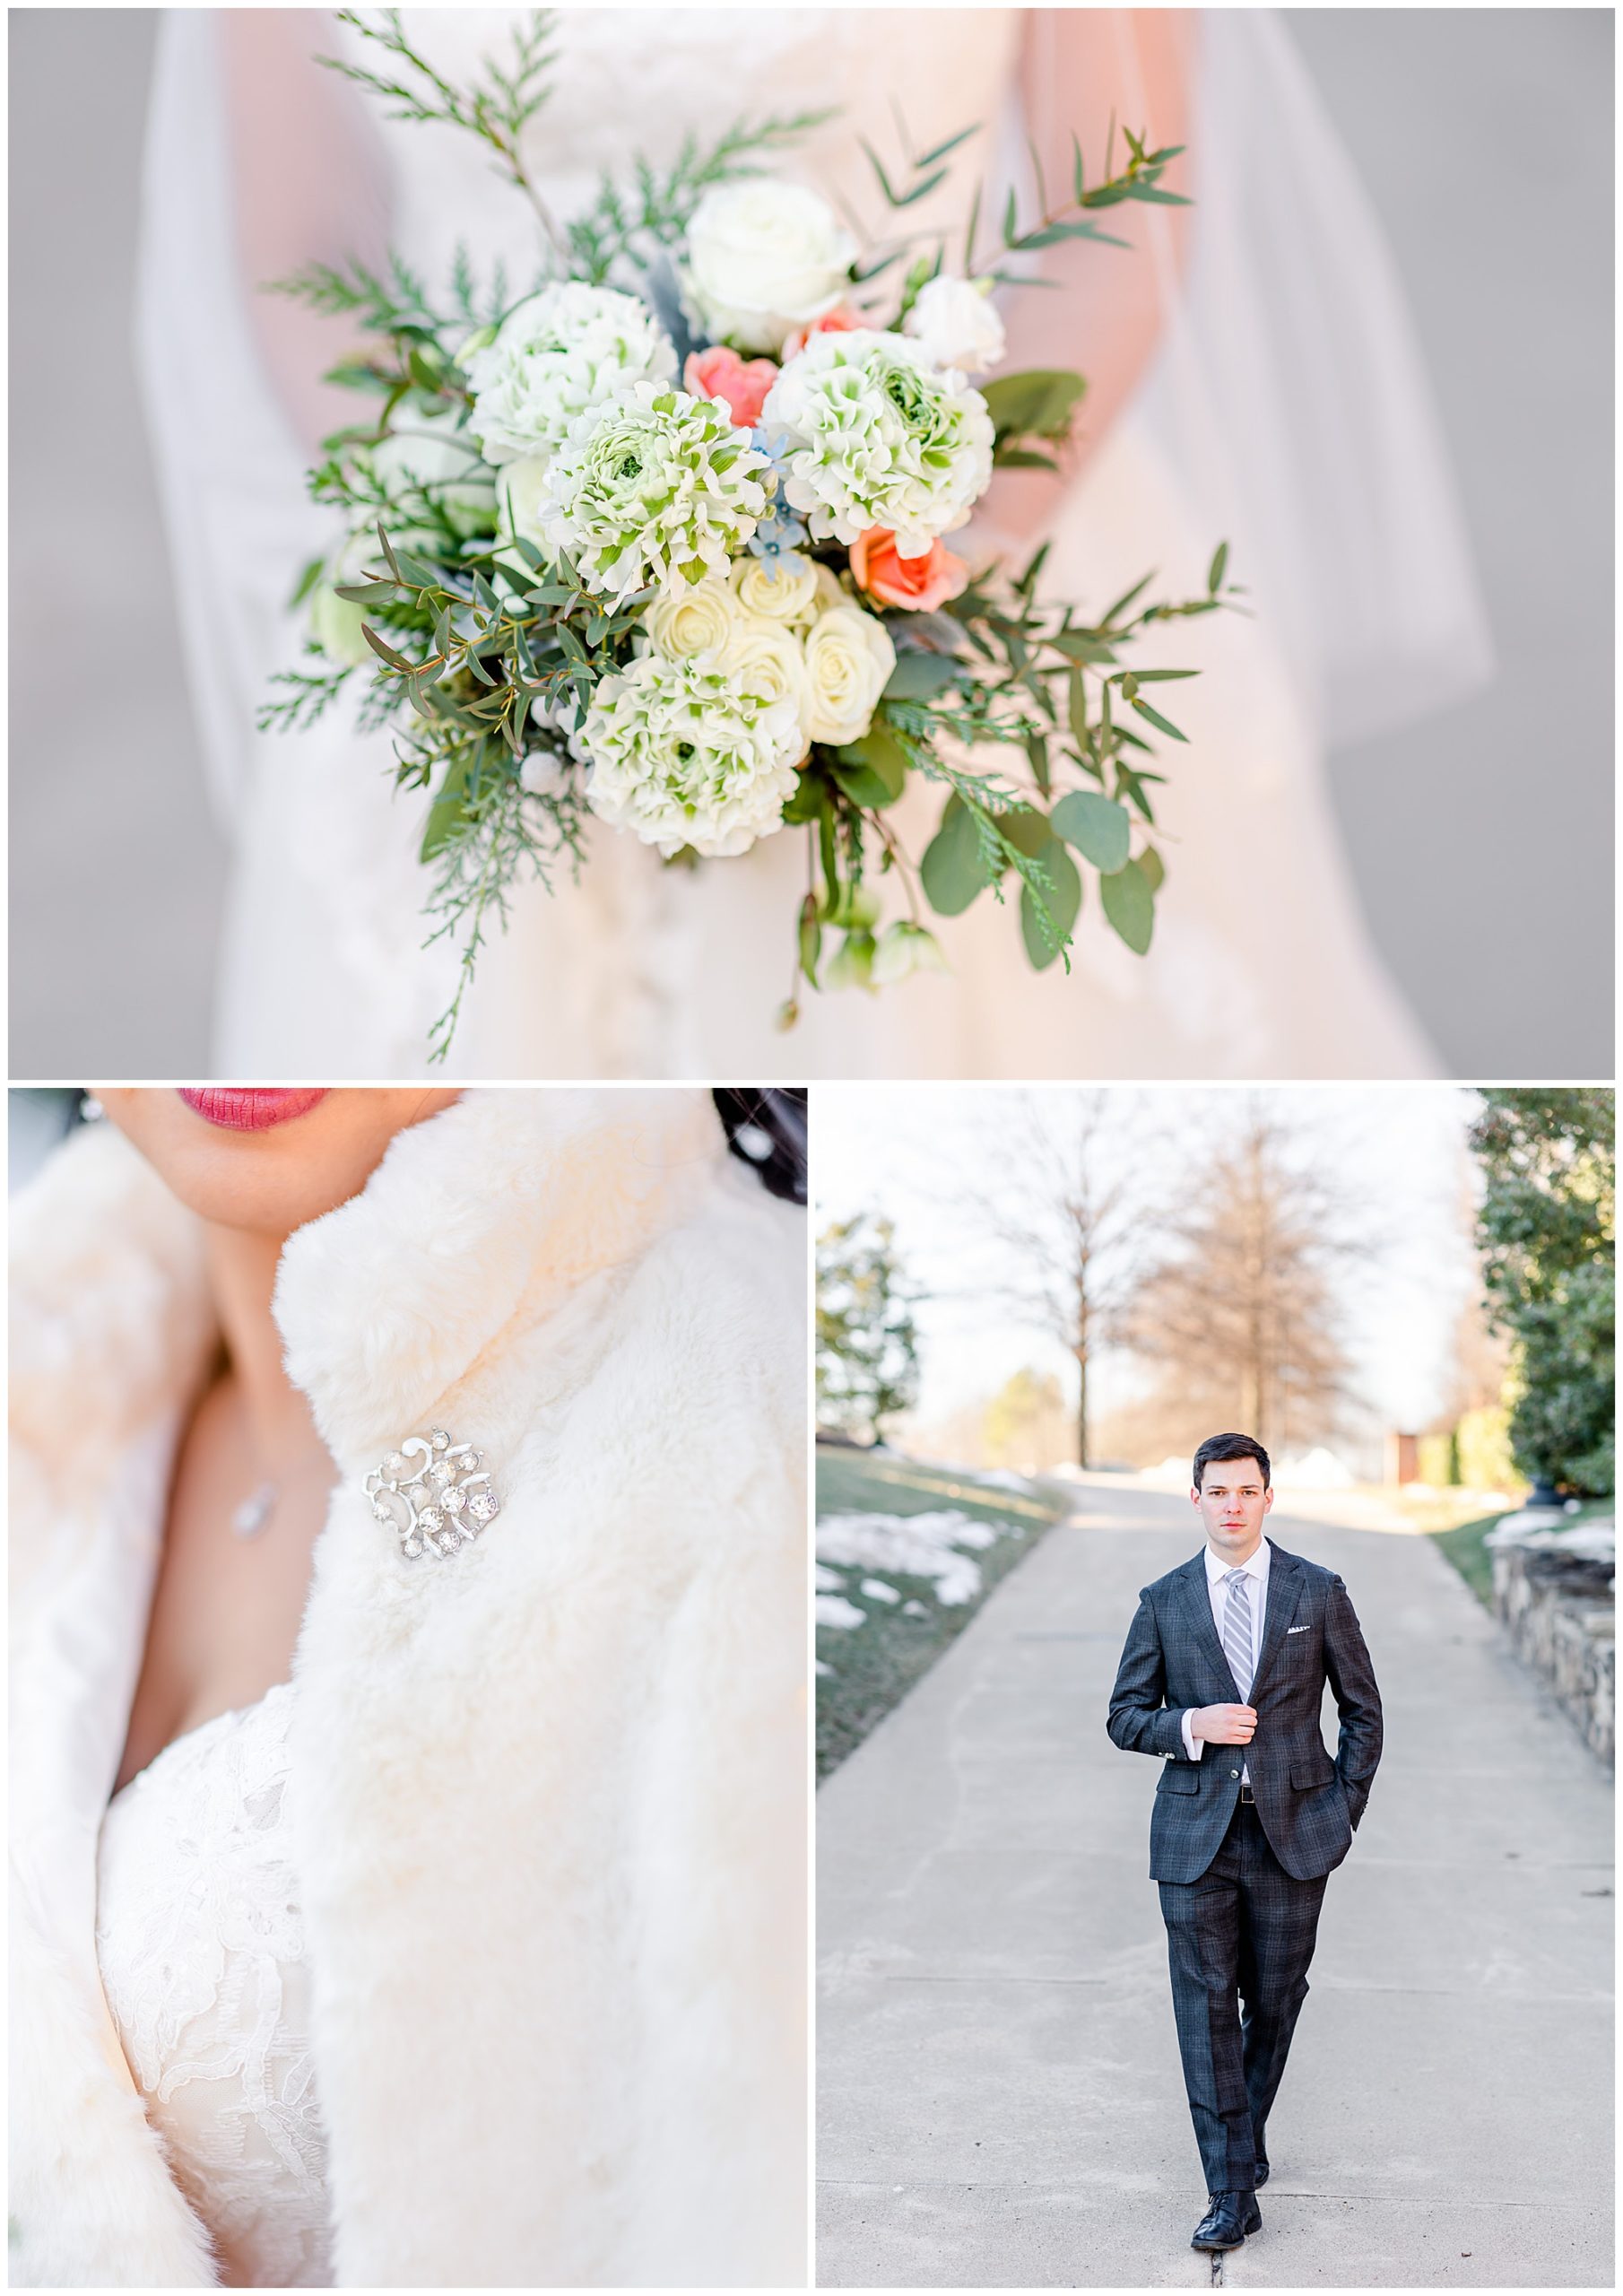 Regency at Dominion Valley wedding, Virginia country club wedding, Haymarket Virginia wedding, northern Virginia wedding, winter wedding, winter wedding aesthetic, DC micro wedding, northern Virginia wedding venues, classic winter wedding, Rachel E.H. Photography, Company Flowers wedding bouquet, bride in white fur coat, groom holding tie